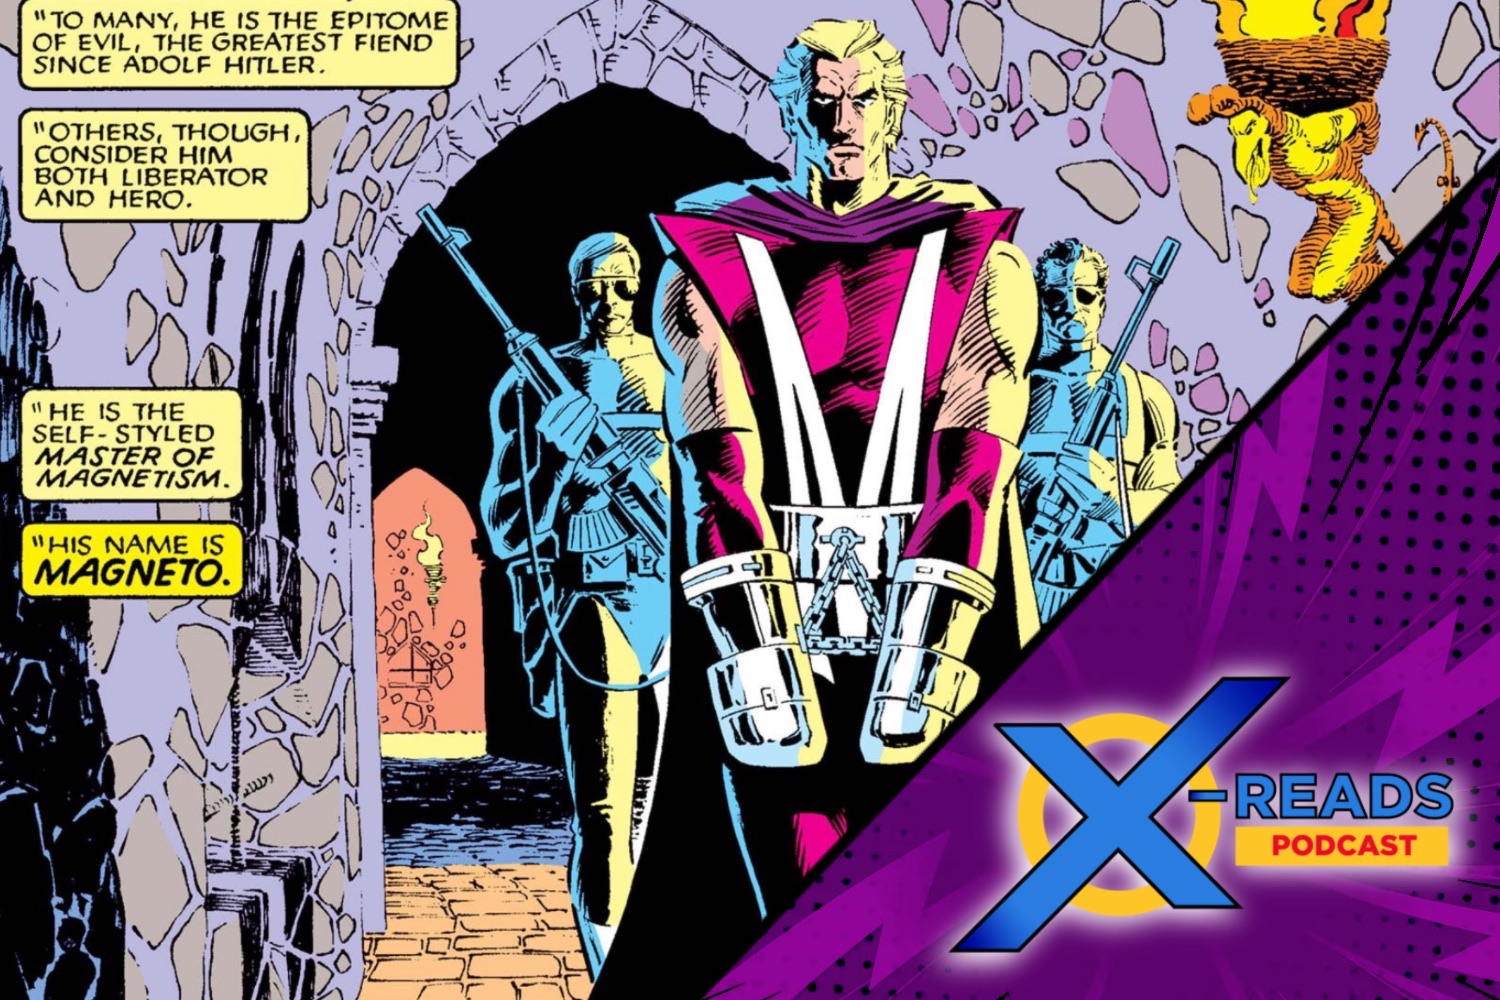 X-Reads Podcast Episode 121: Special guest Matthew Waterson, voice of Magneto in X-Men '97 and the infamous Trial